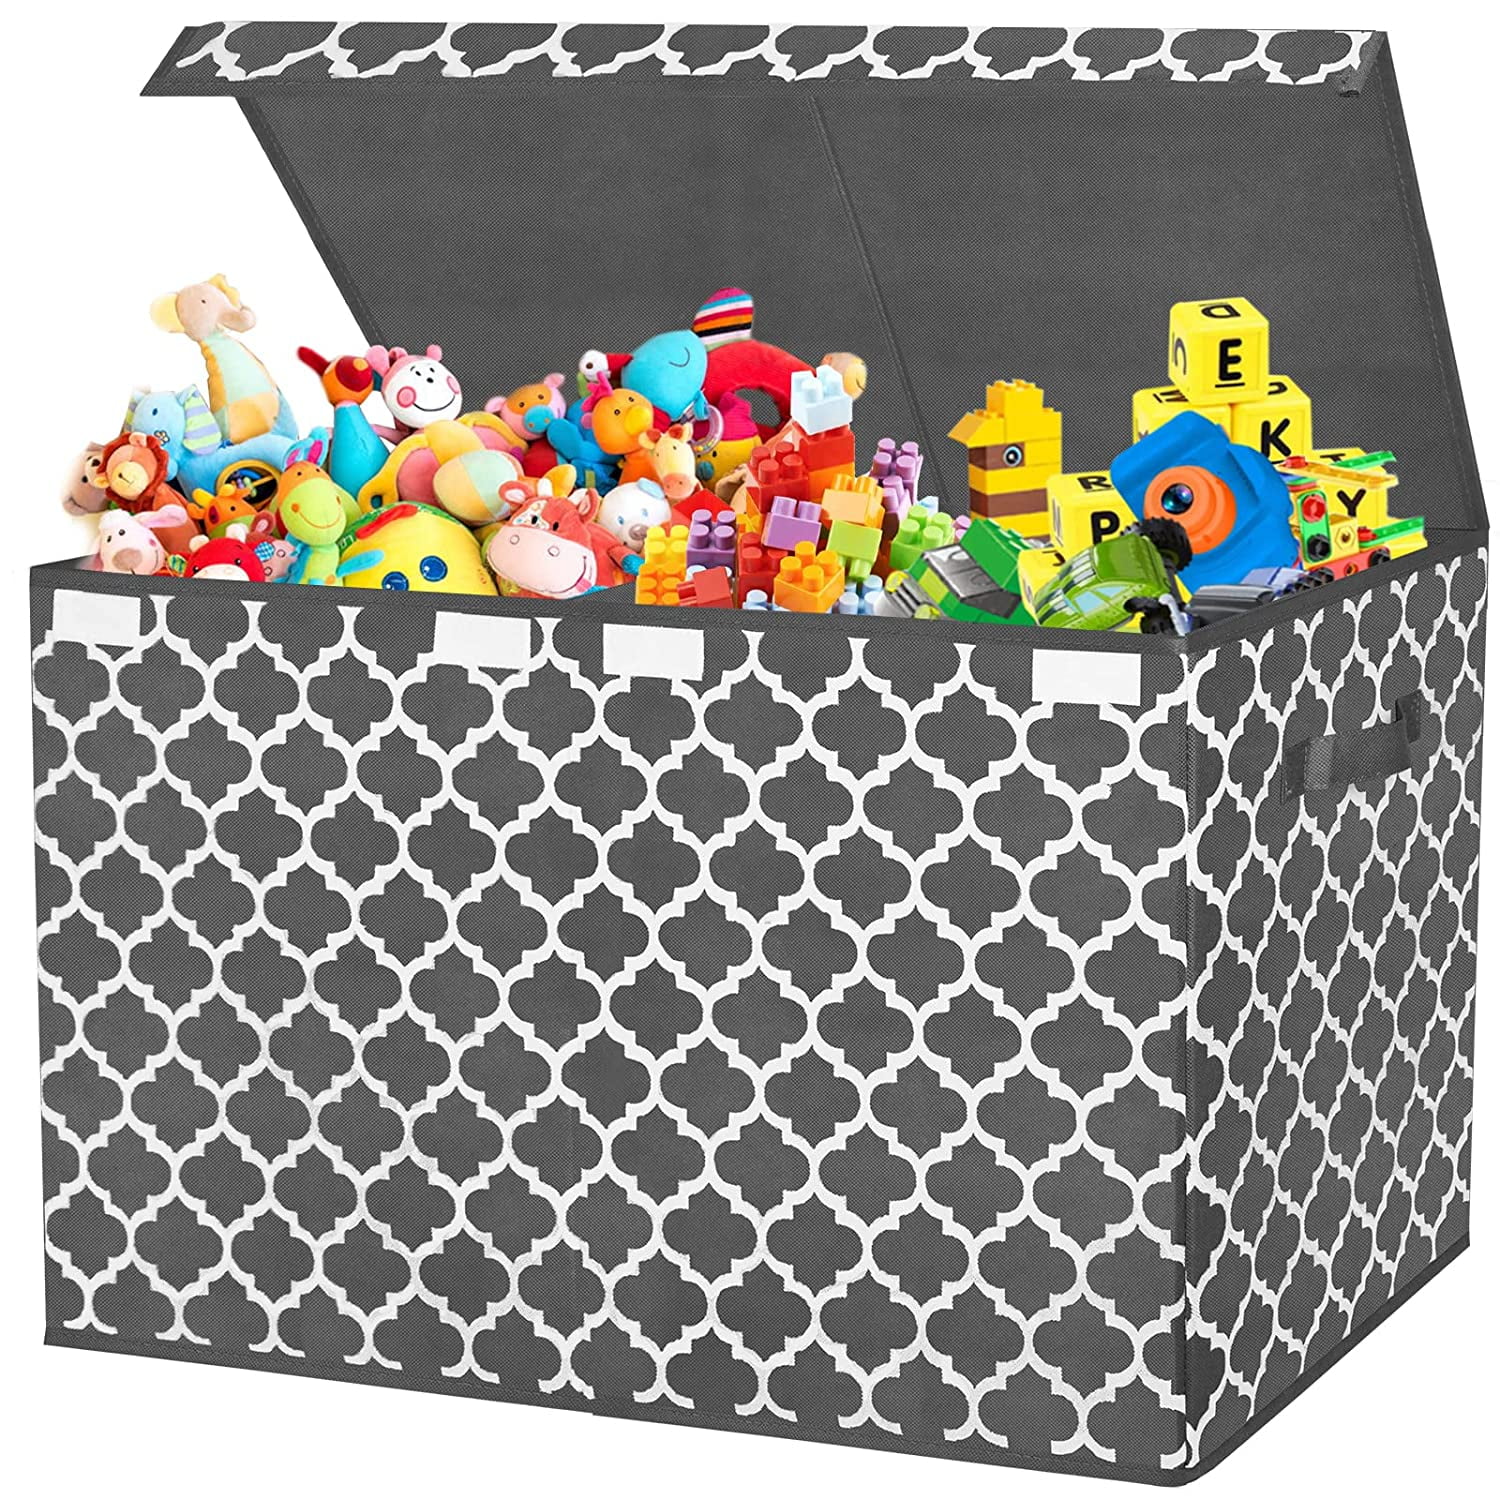 YOLOXO Large Kids Toy Box Chest Storage organizer with Double Flip-Top Lid  - Collapsible Sturdy Toy Organizers And Storage Bins With Big Handles For